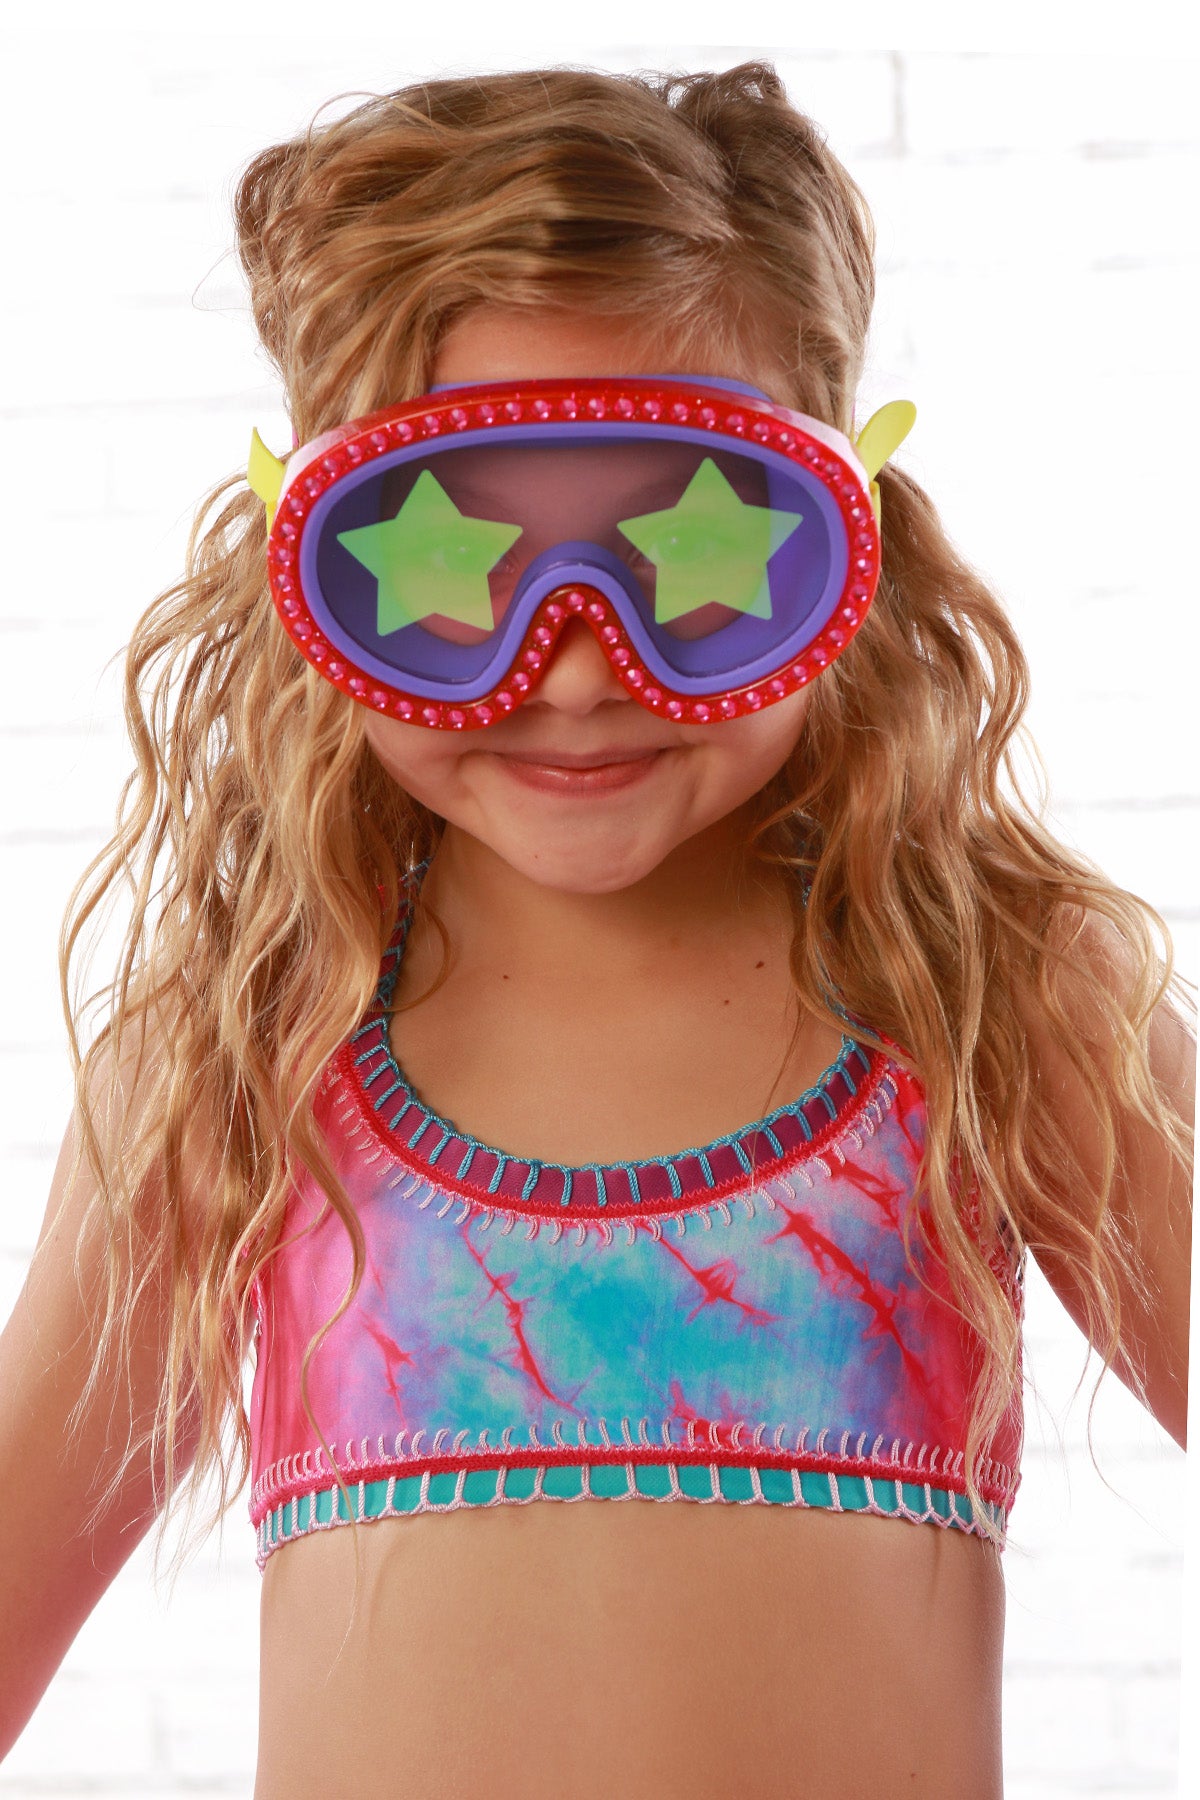 Girls swim mask with stars by bling20